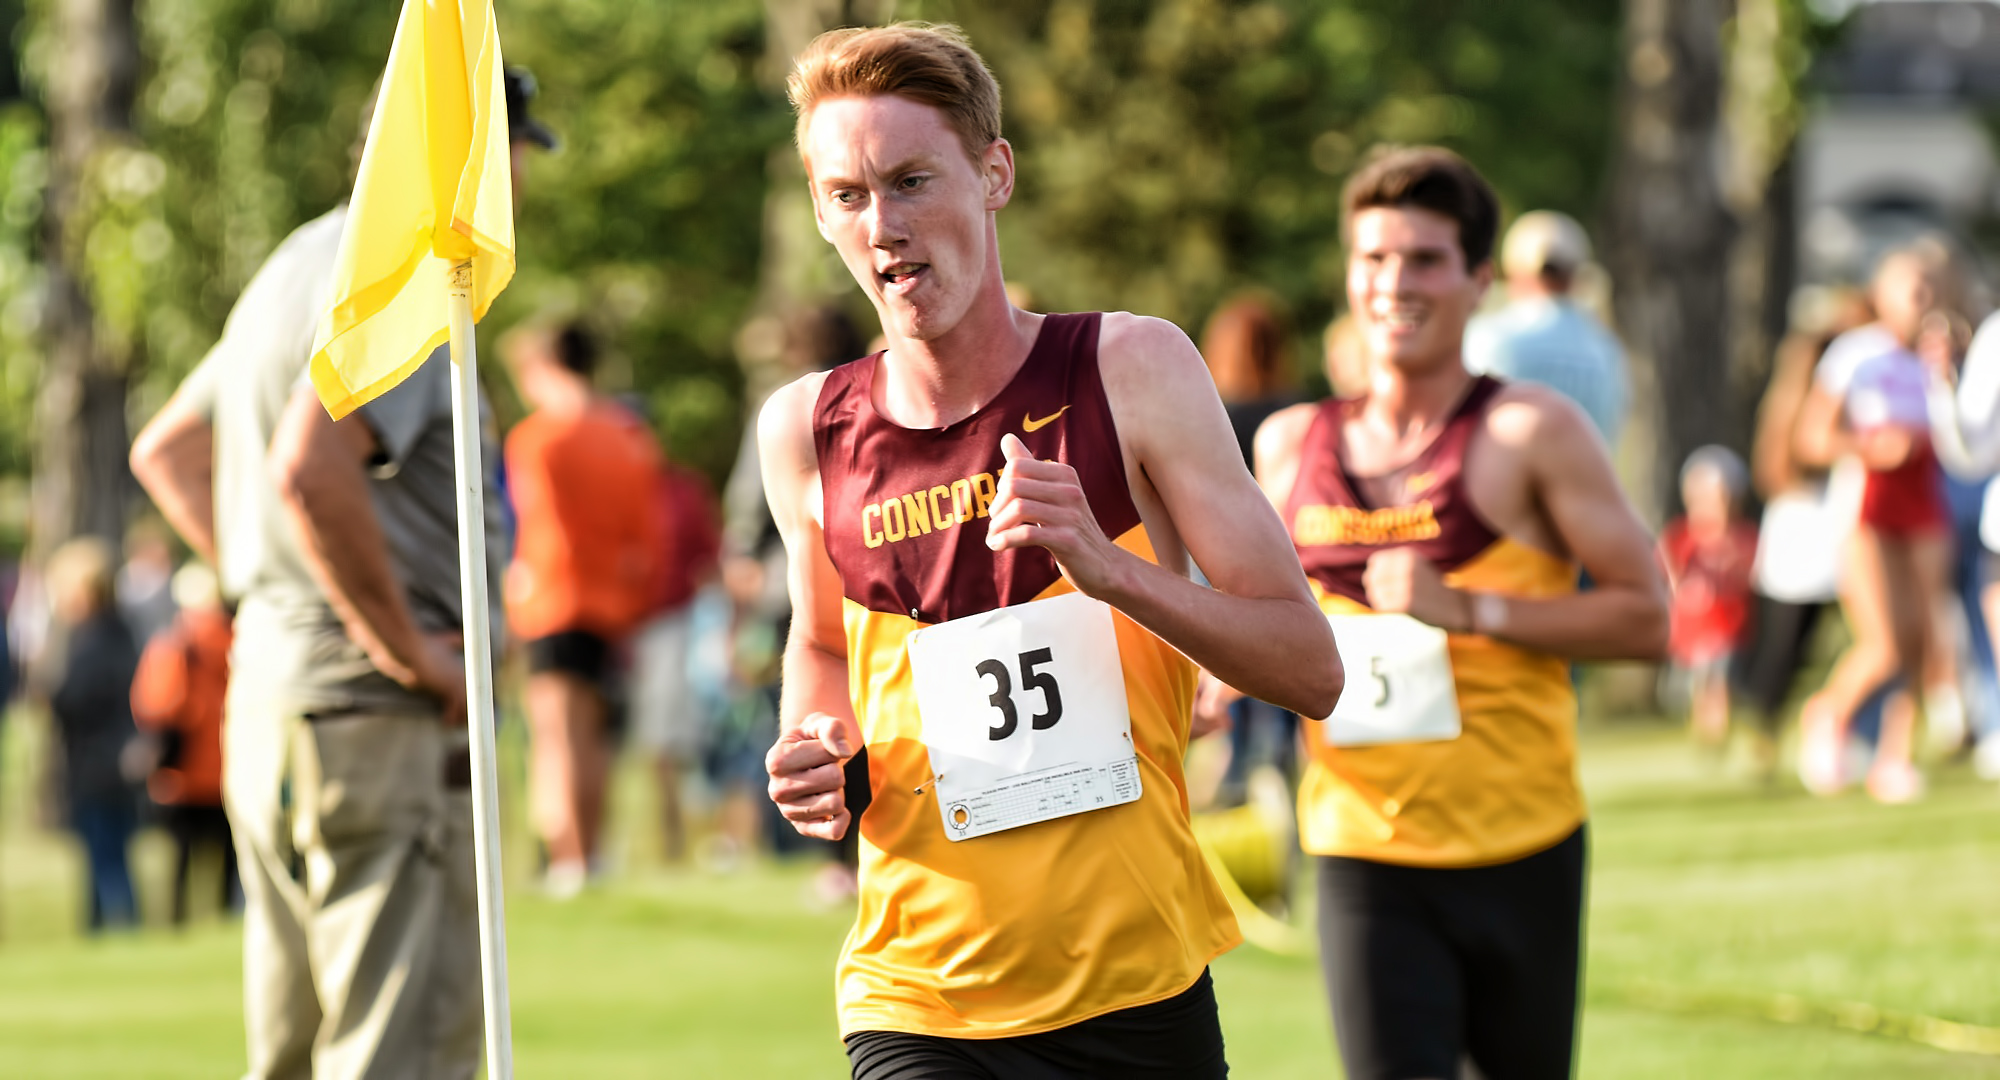 Freshman Basil Ricker earned his first team Top 5 finish of the year as he ran a 28:51 at the UND Ron Pynn Invite.